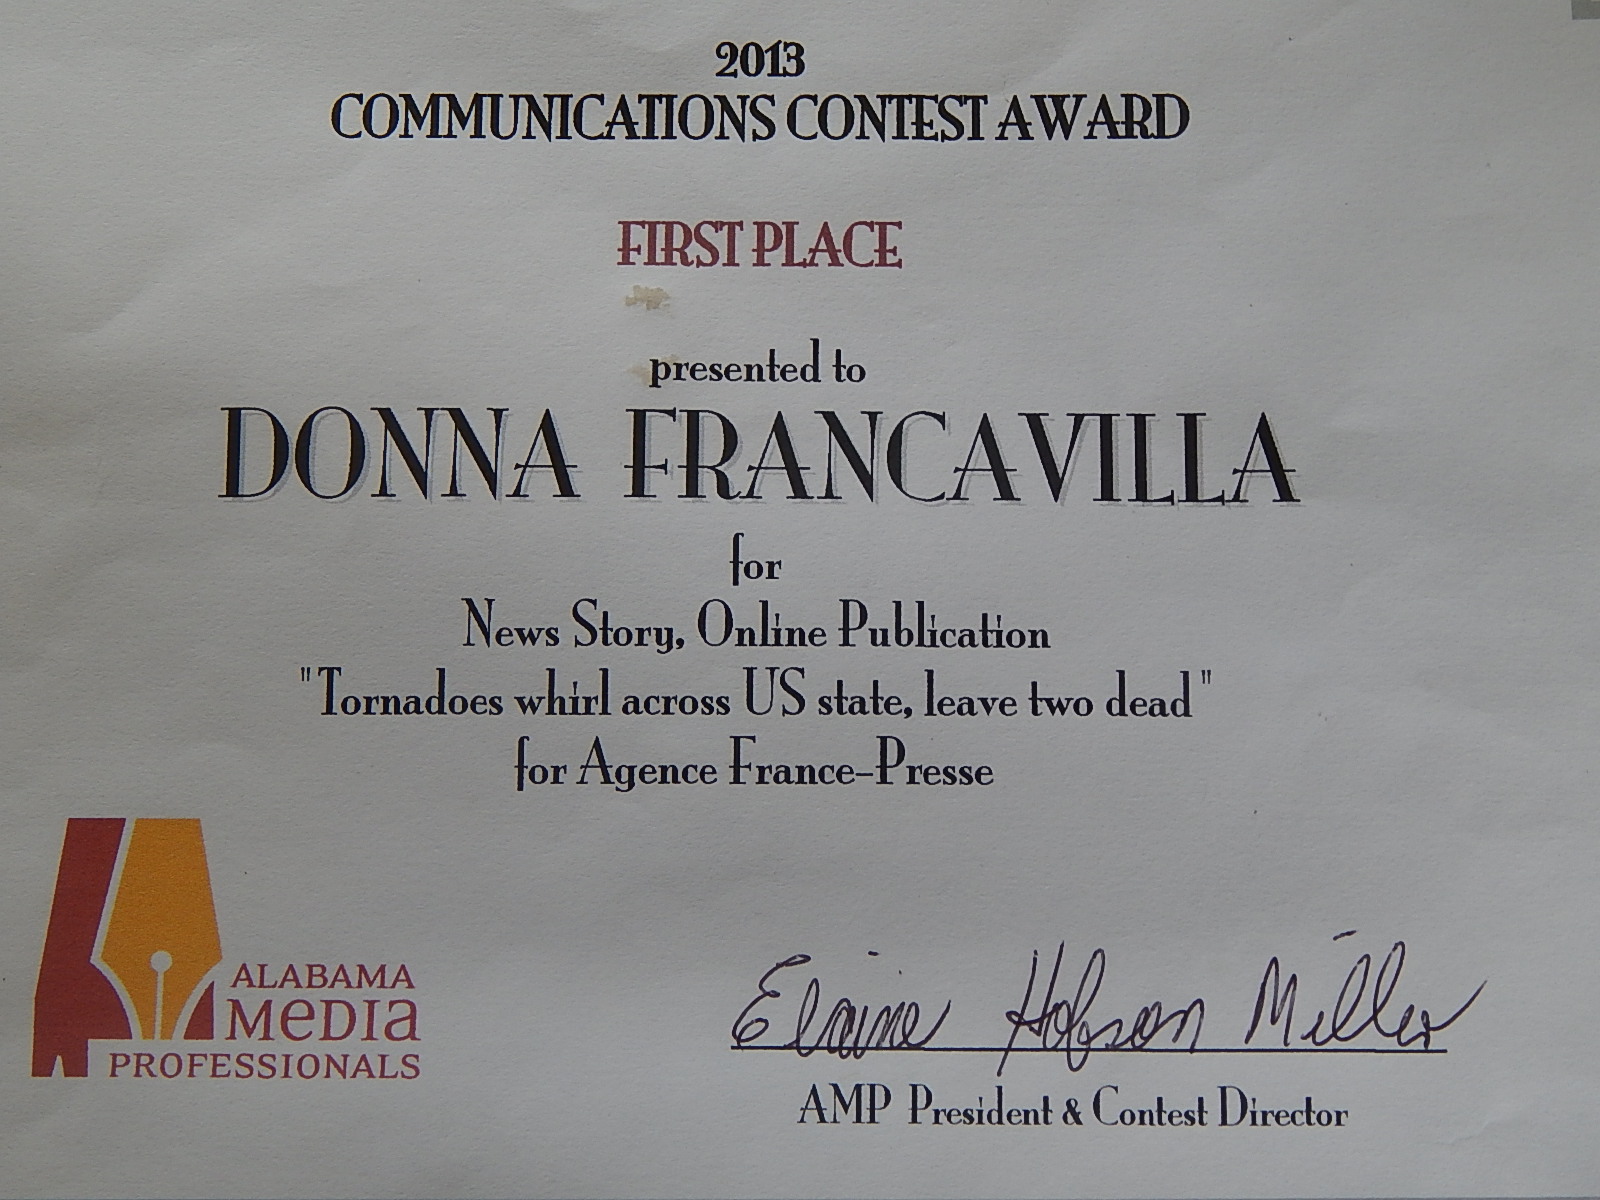 2013 Alabama Media Professionals Communications Contest Award – State Award – First Place presented to Donna Francavilla for News Story – Online Publication “Tornadoes whirl across US state, leave two dead” for Agence France-Presse